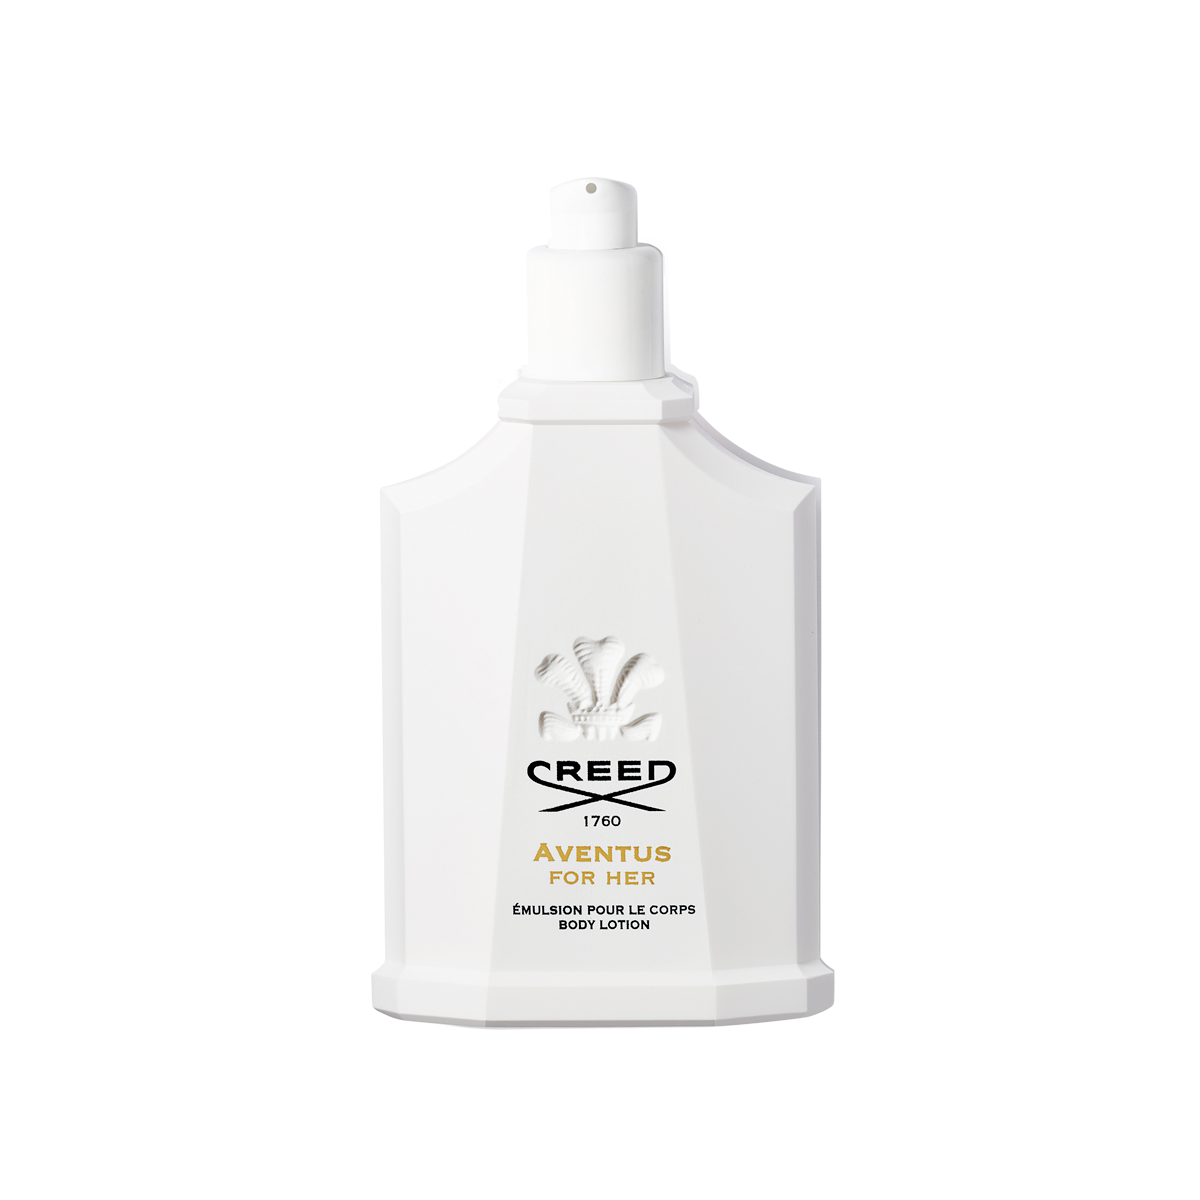 Creed - Aventus for Her Bodylotion